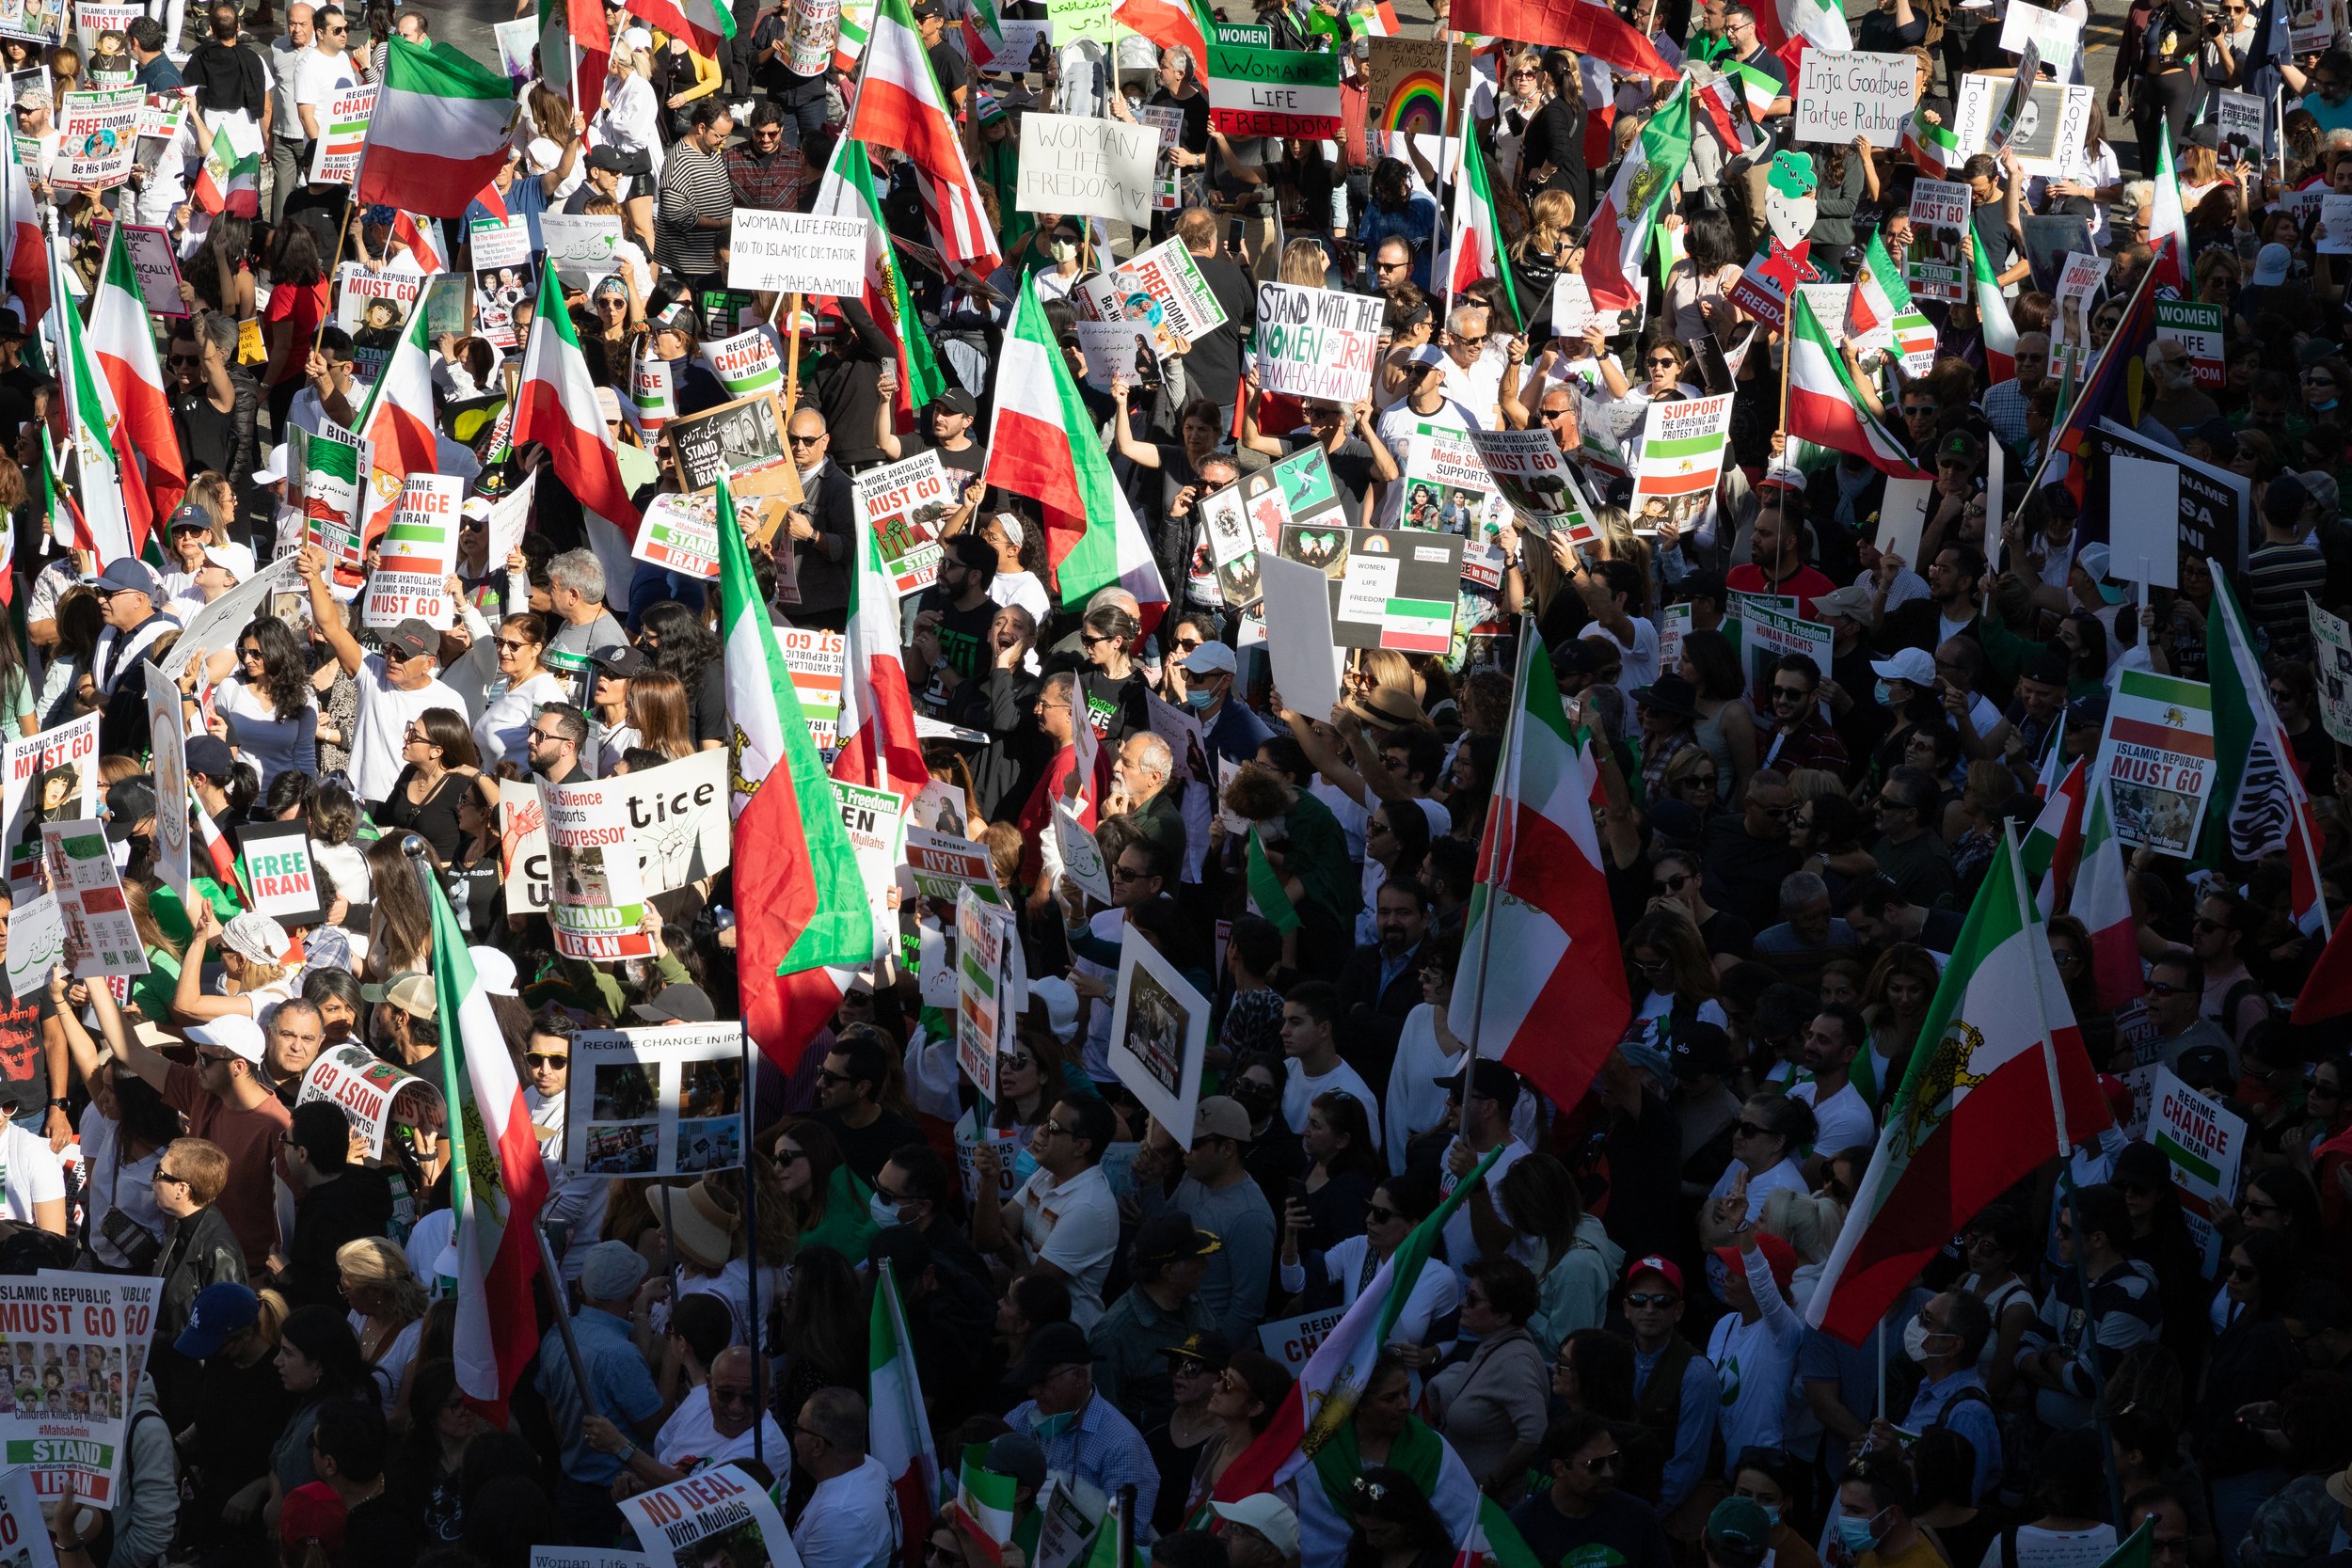  The crowd at the Freedom for Iran rally on Hollywood Blvd, Hollywood, Calif. on Saturday, Nov. 19, 2022. (Caylo Seals | The Corsair) 